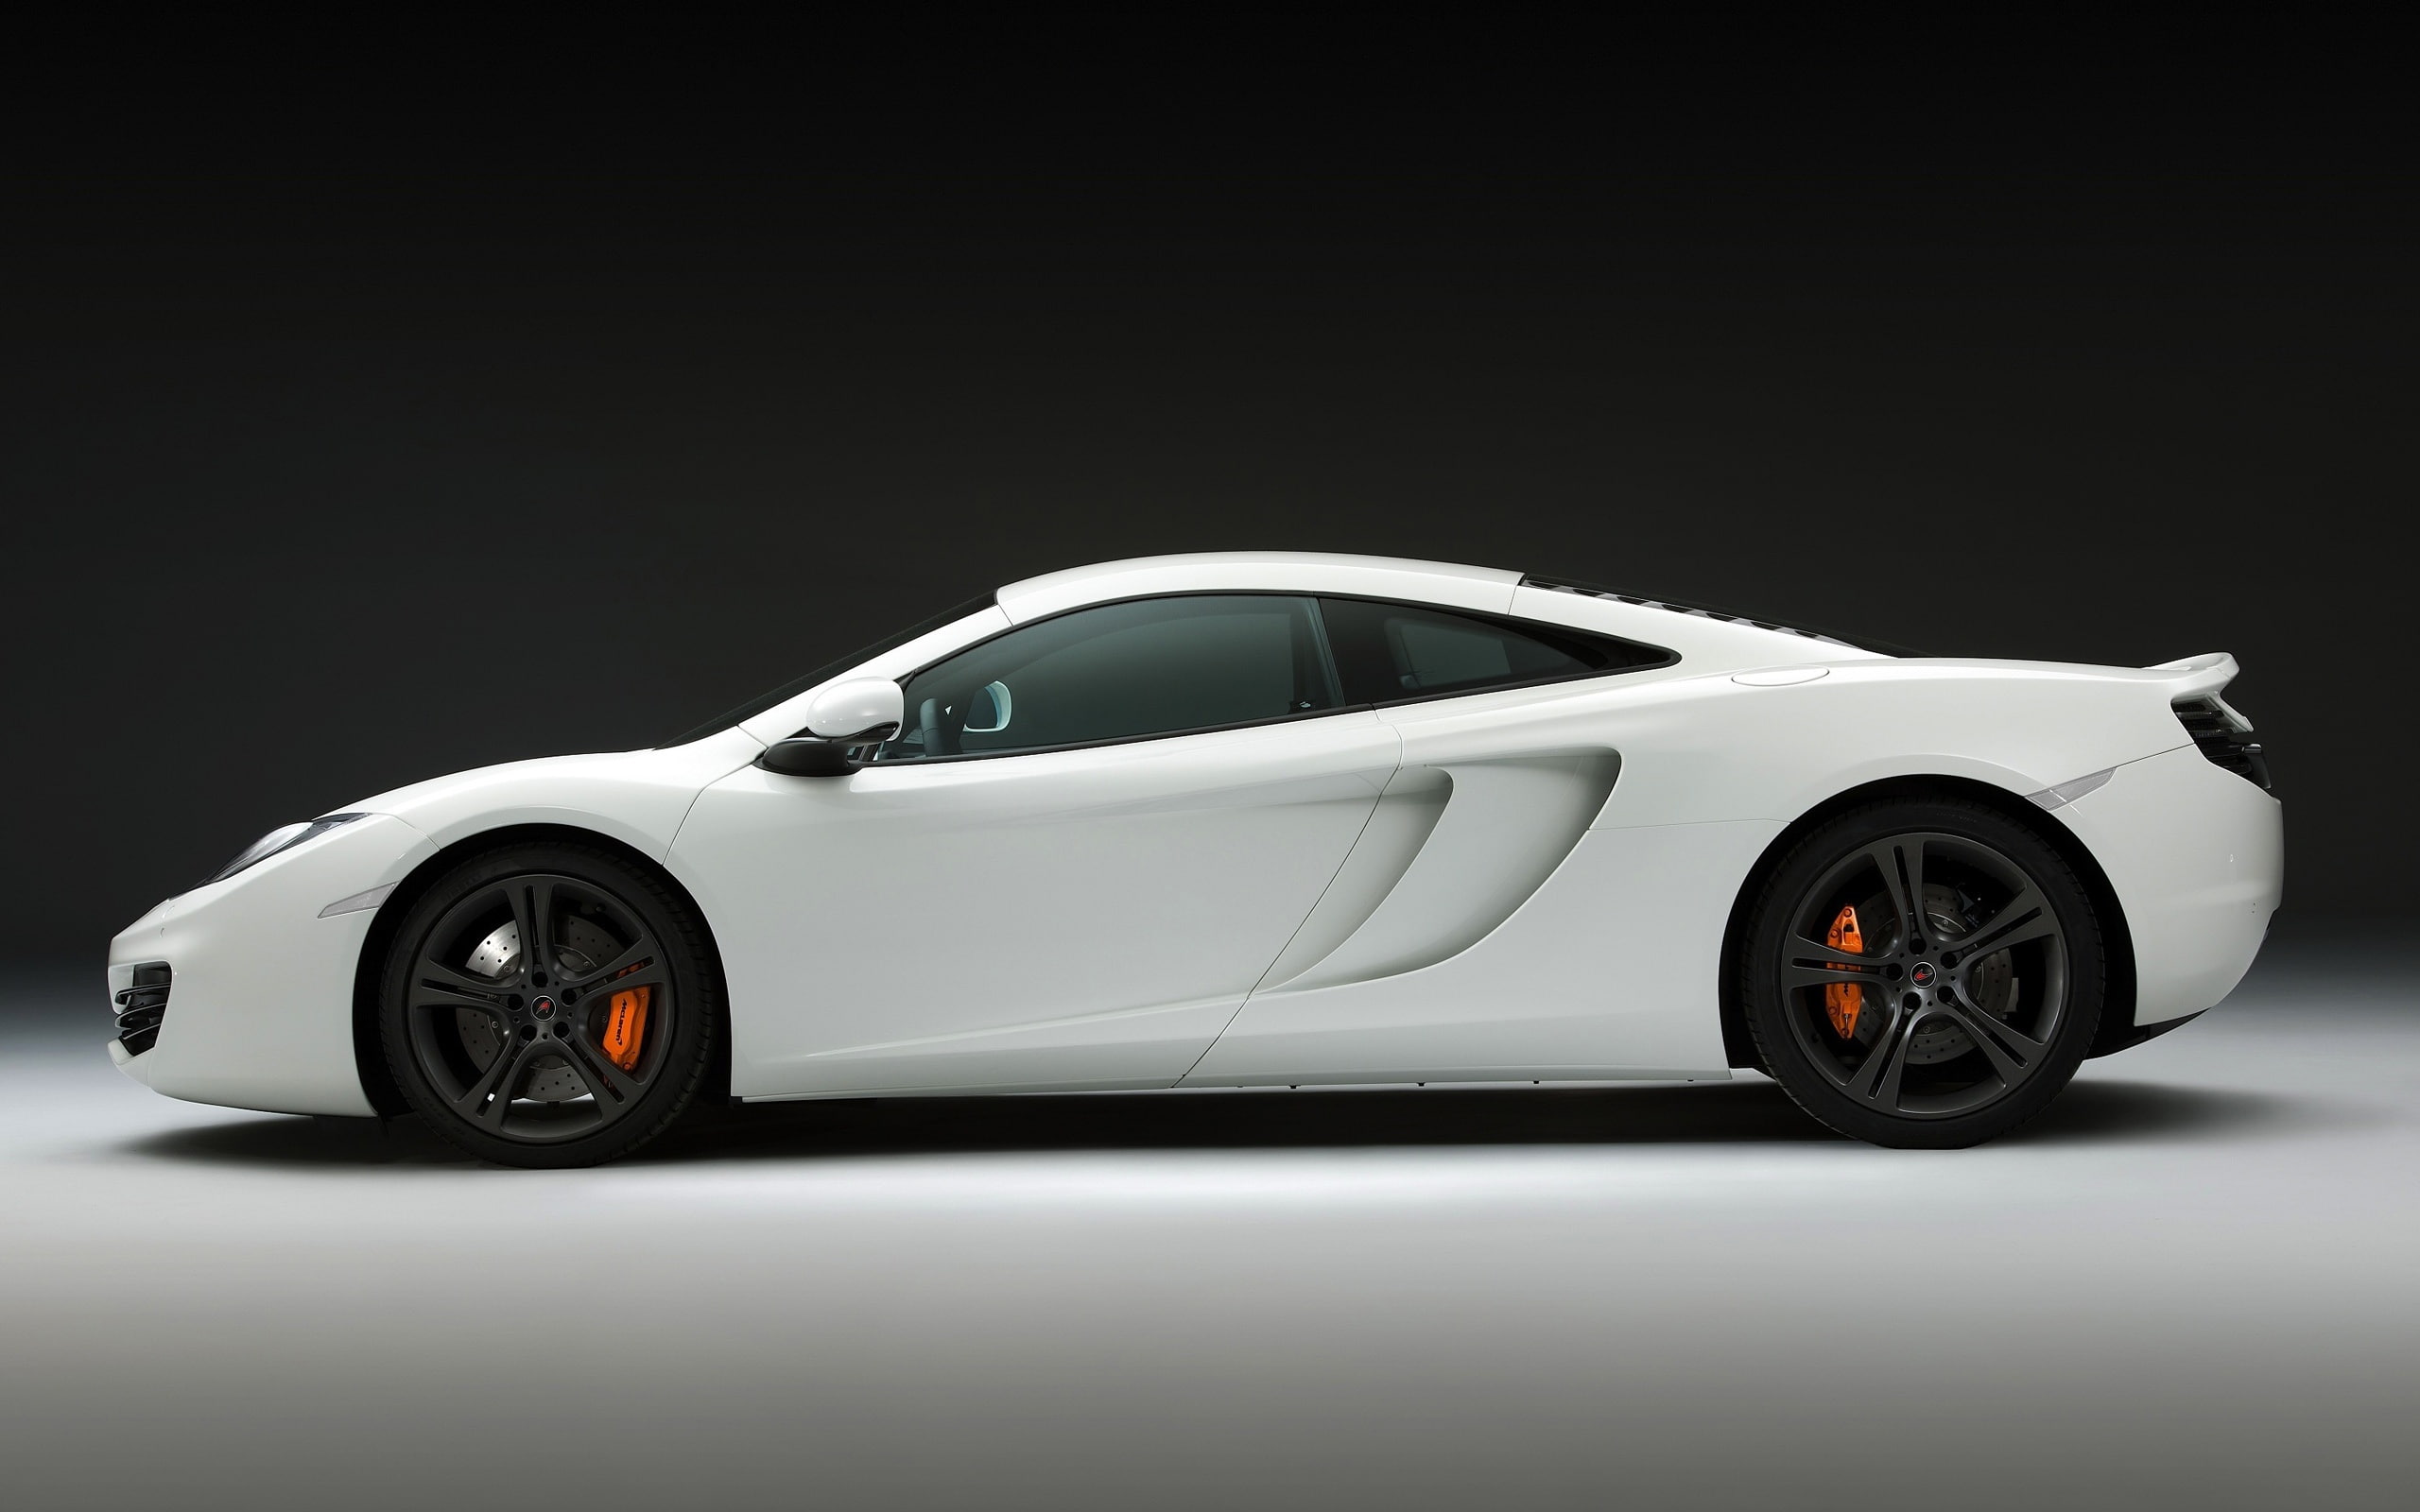 McLaren MP4-12C white supercar, side close-up, white and black coupe